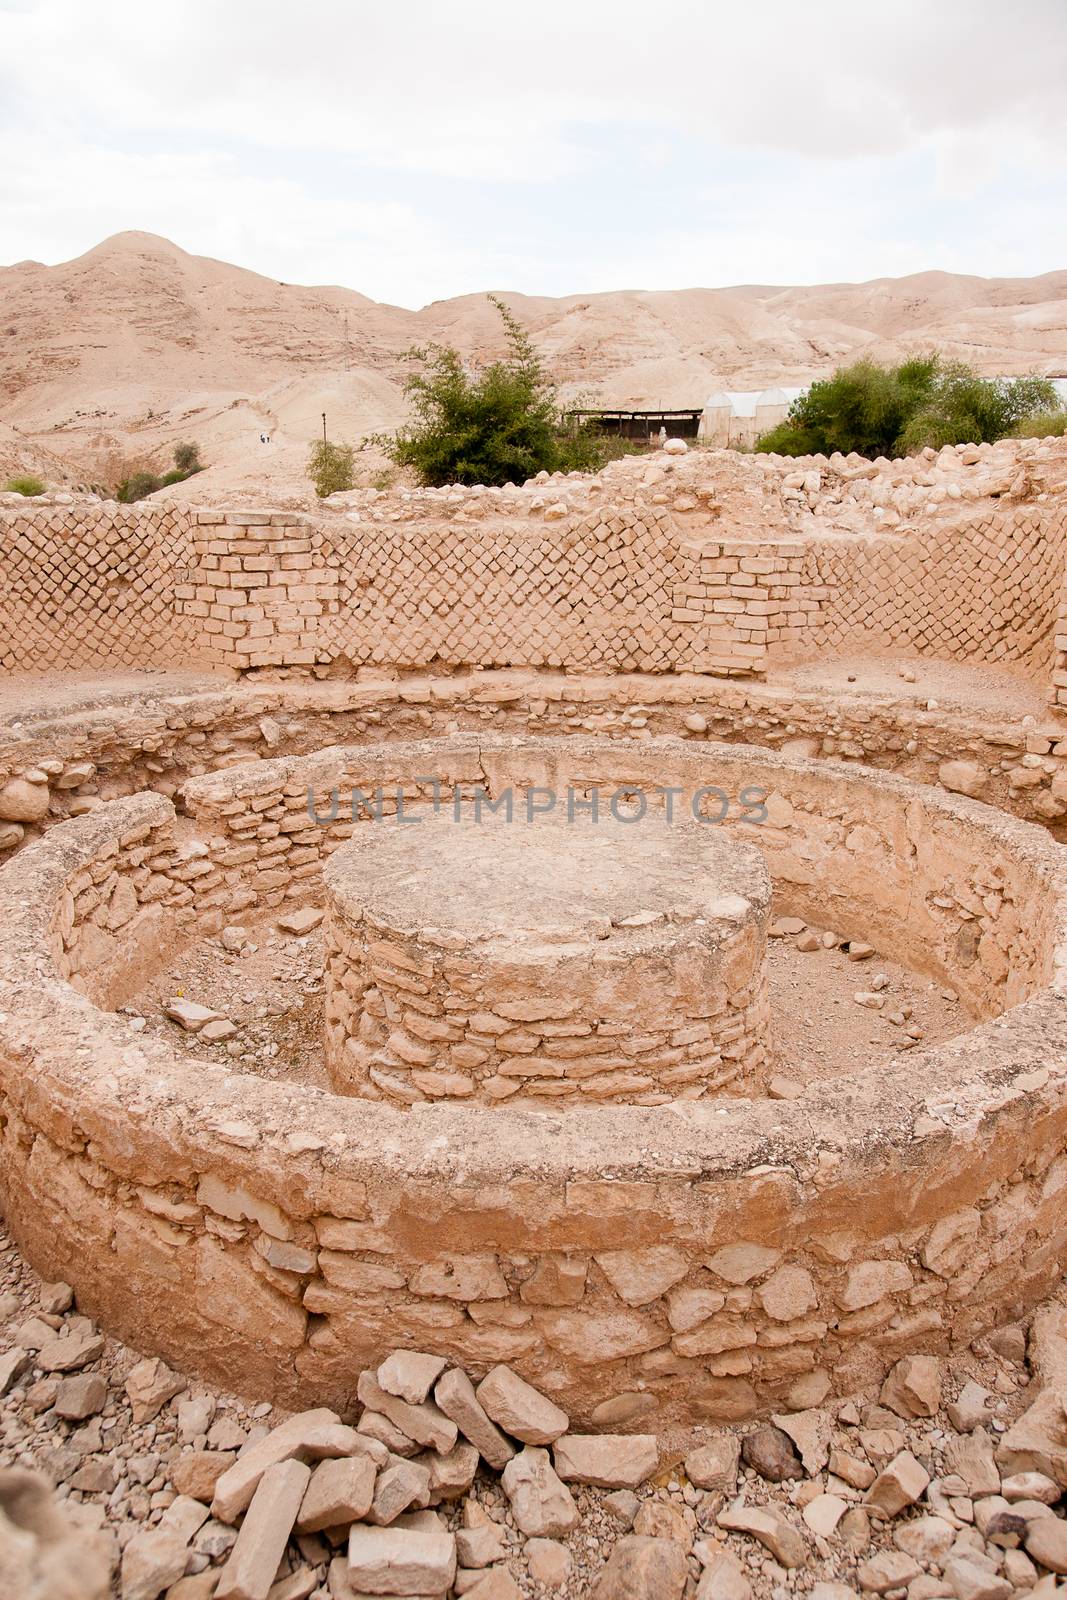 Excavations near Jericho city of ancient palace